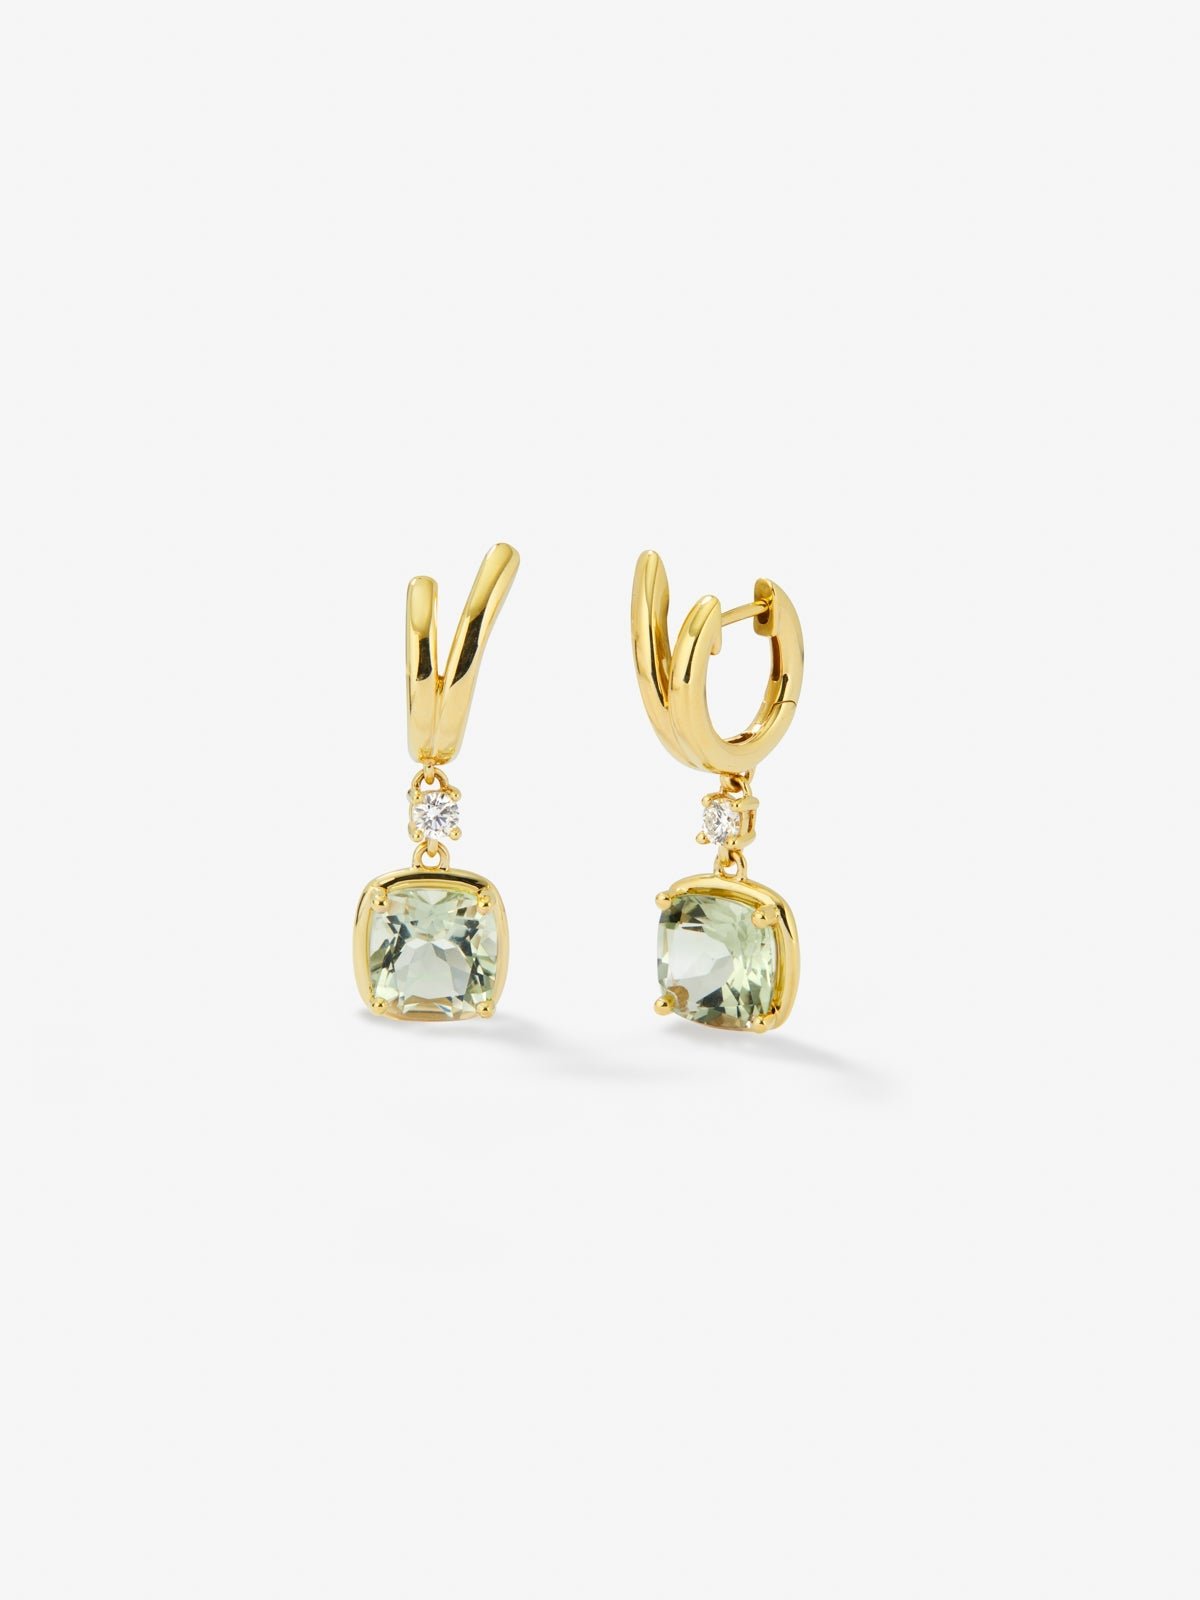 18K yellow gold earrings with 2 cushion-cut green amethysts with a total of 6.4 cts and 2 brilliant-cut diamonds with a total of 0.21 cts